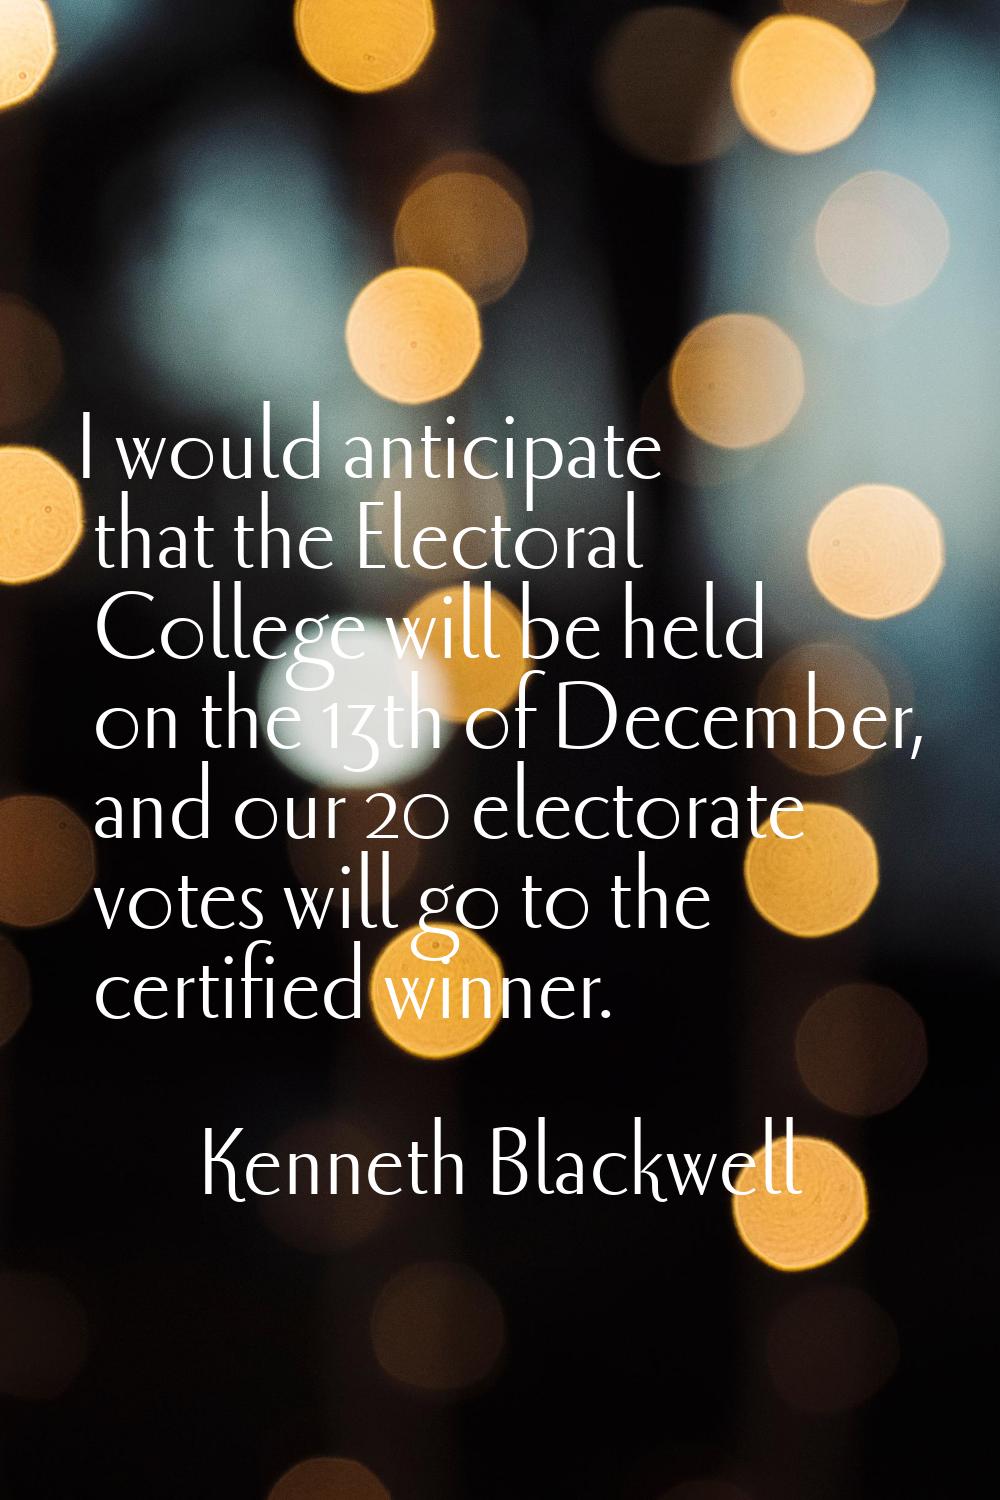 I would anticipate that the Electoral College will be held on the 13th of December, and our 20 elec